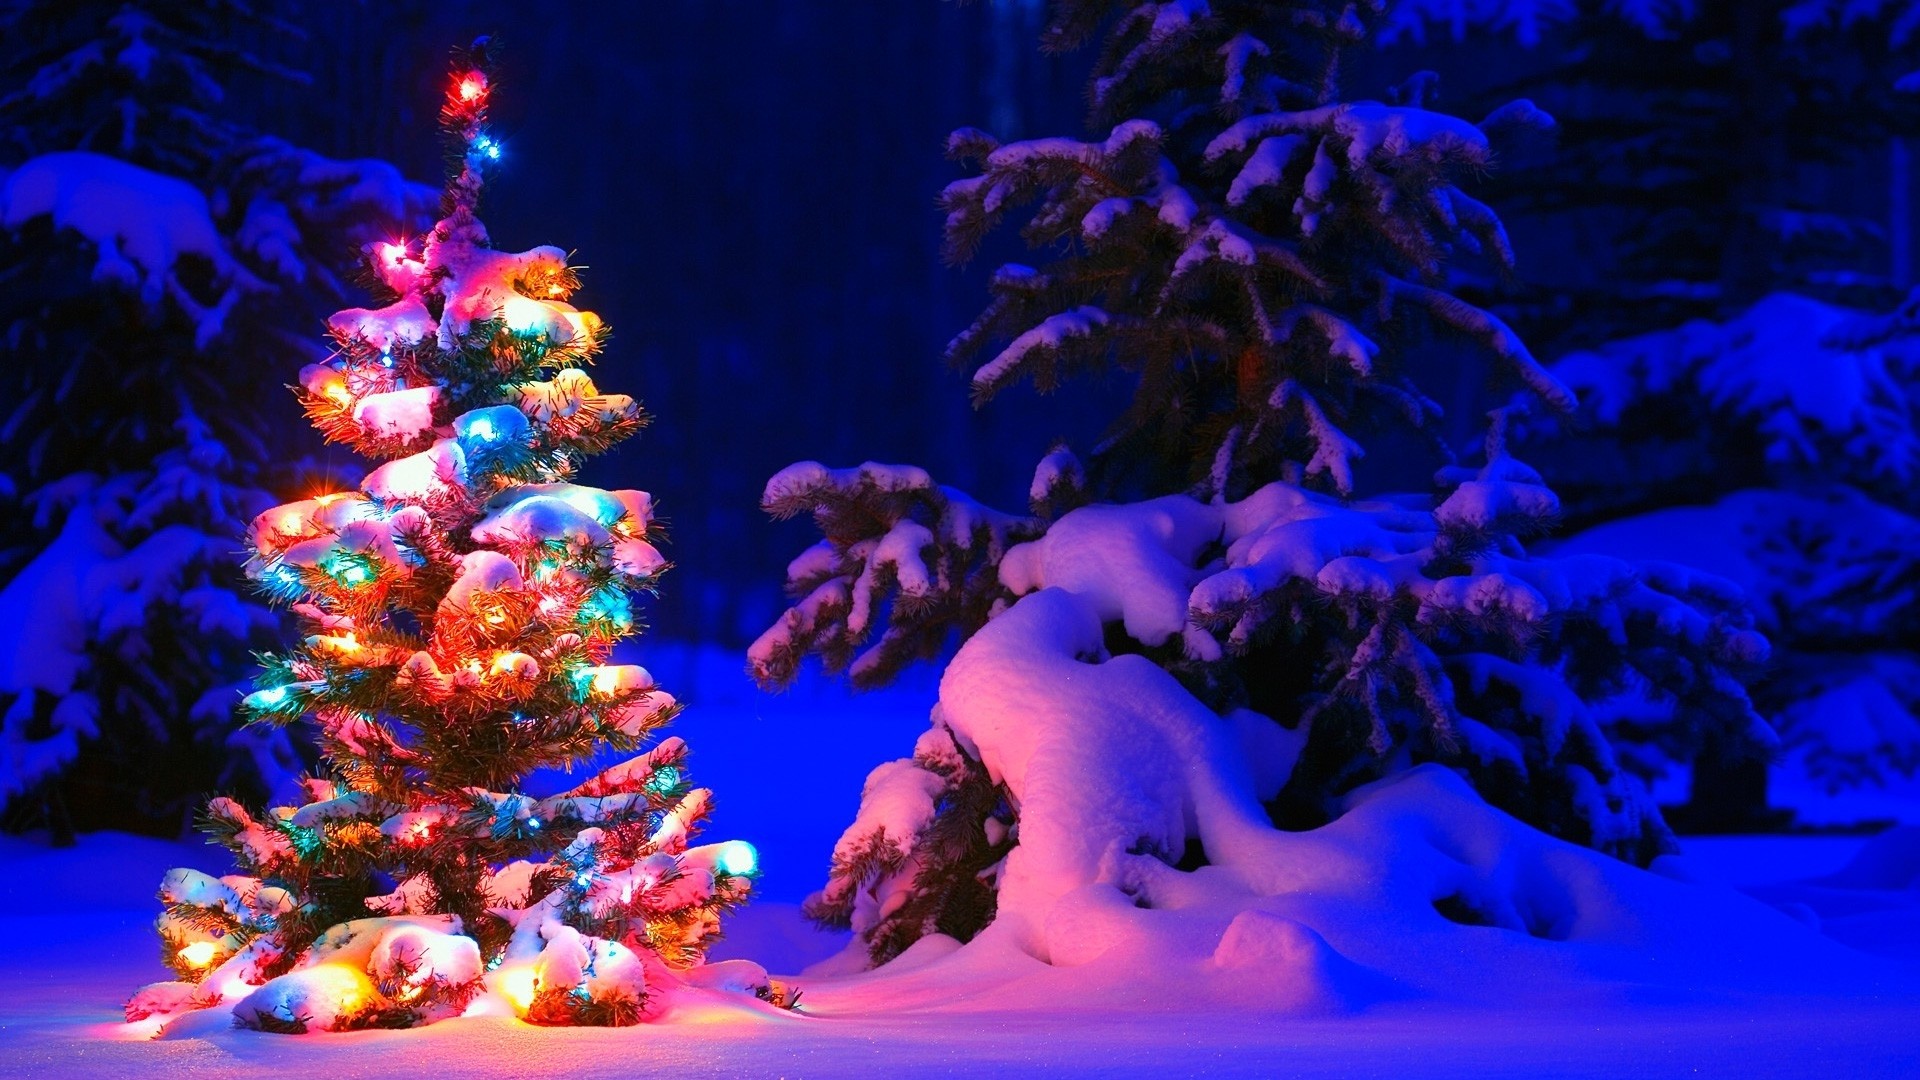 1920x1080 Title : snowy christmas tree lights wallpapers | hd wallpapers | id #17824.  Dimension : 1920 x 1080. File Type : JPG/JPEG